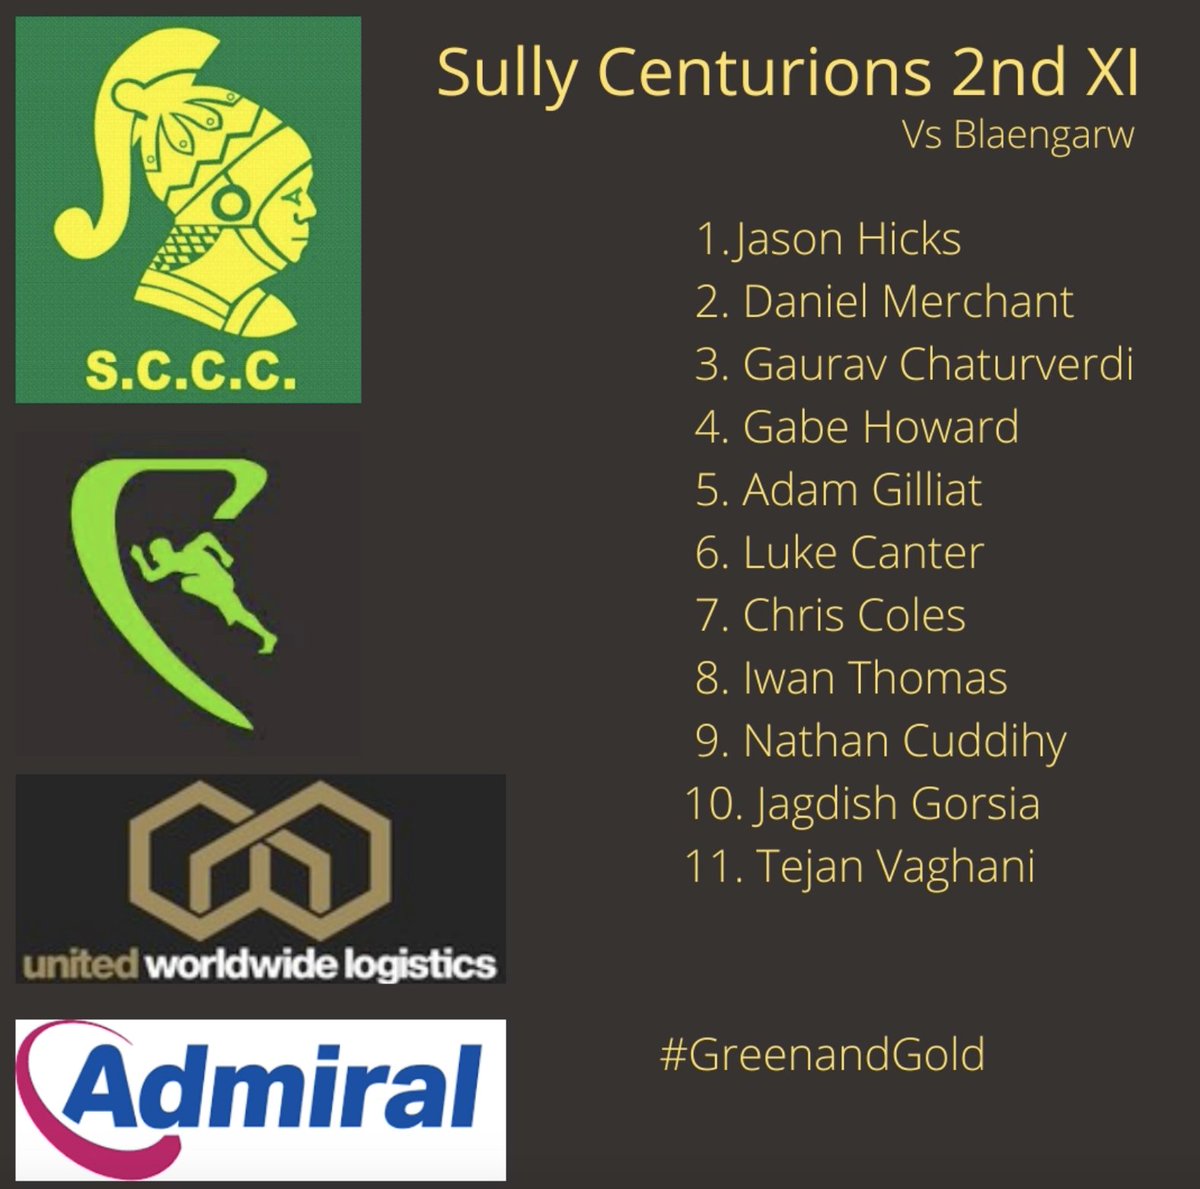 Sully Centurions 1st XI travel to Ponthir this weekend while the 2nd XI host Blaengarw.